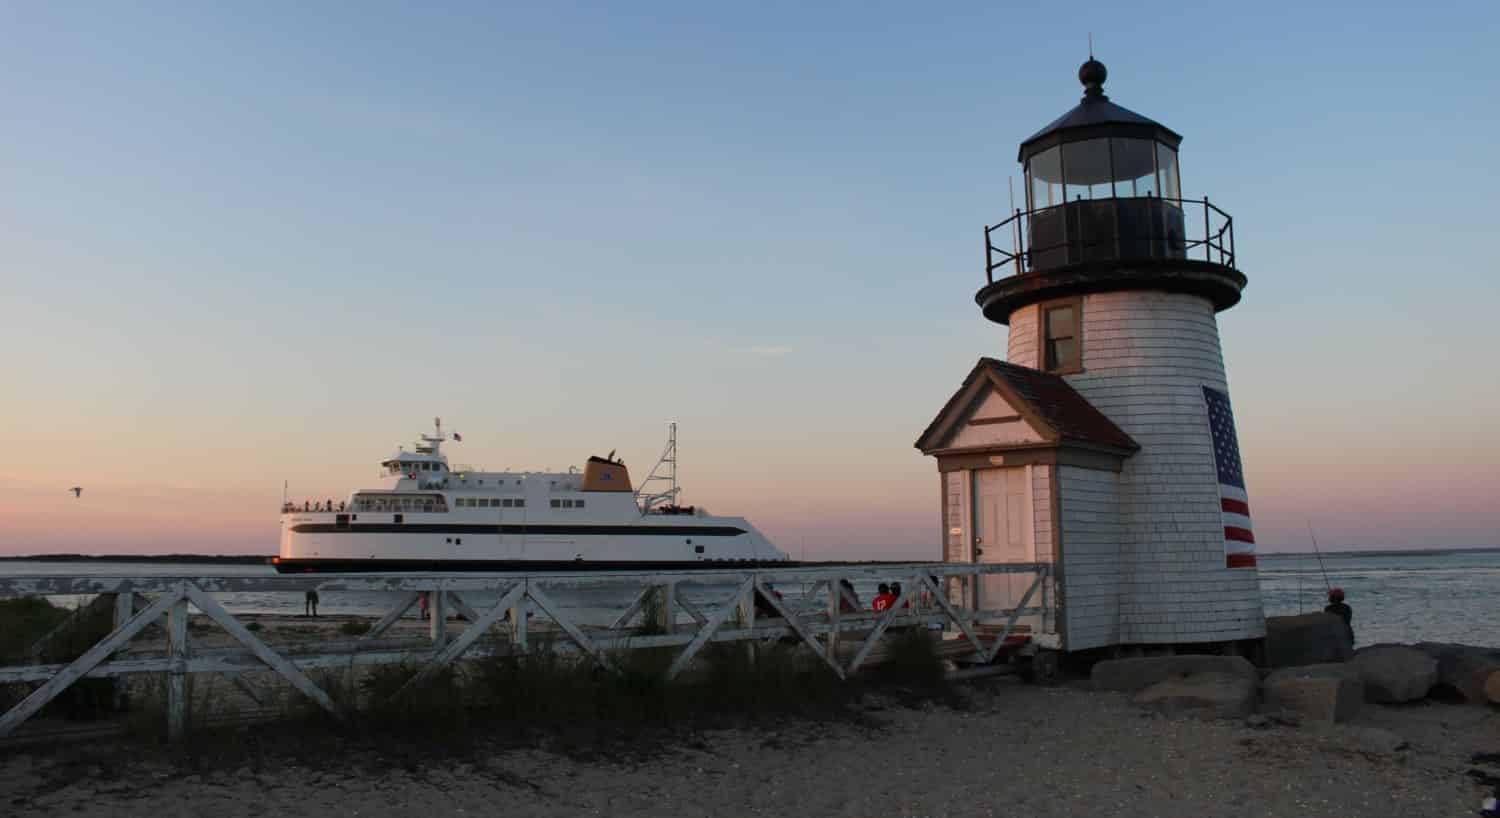 Small lighthouse next to ocean with small cruise ship in the background at dusk